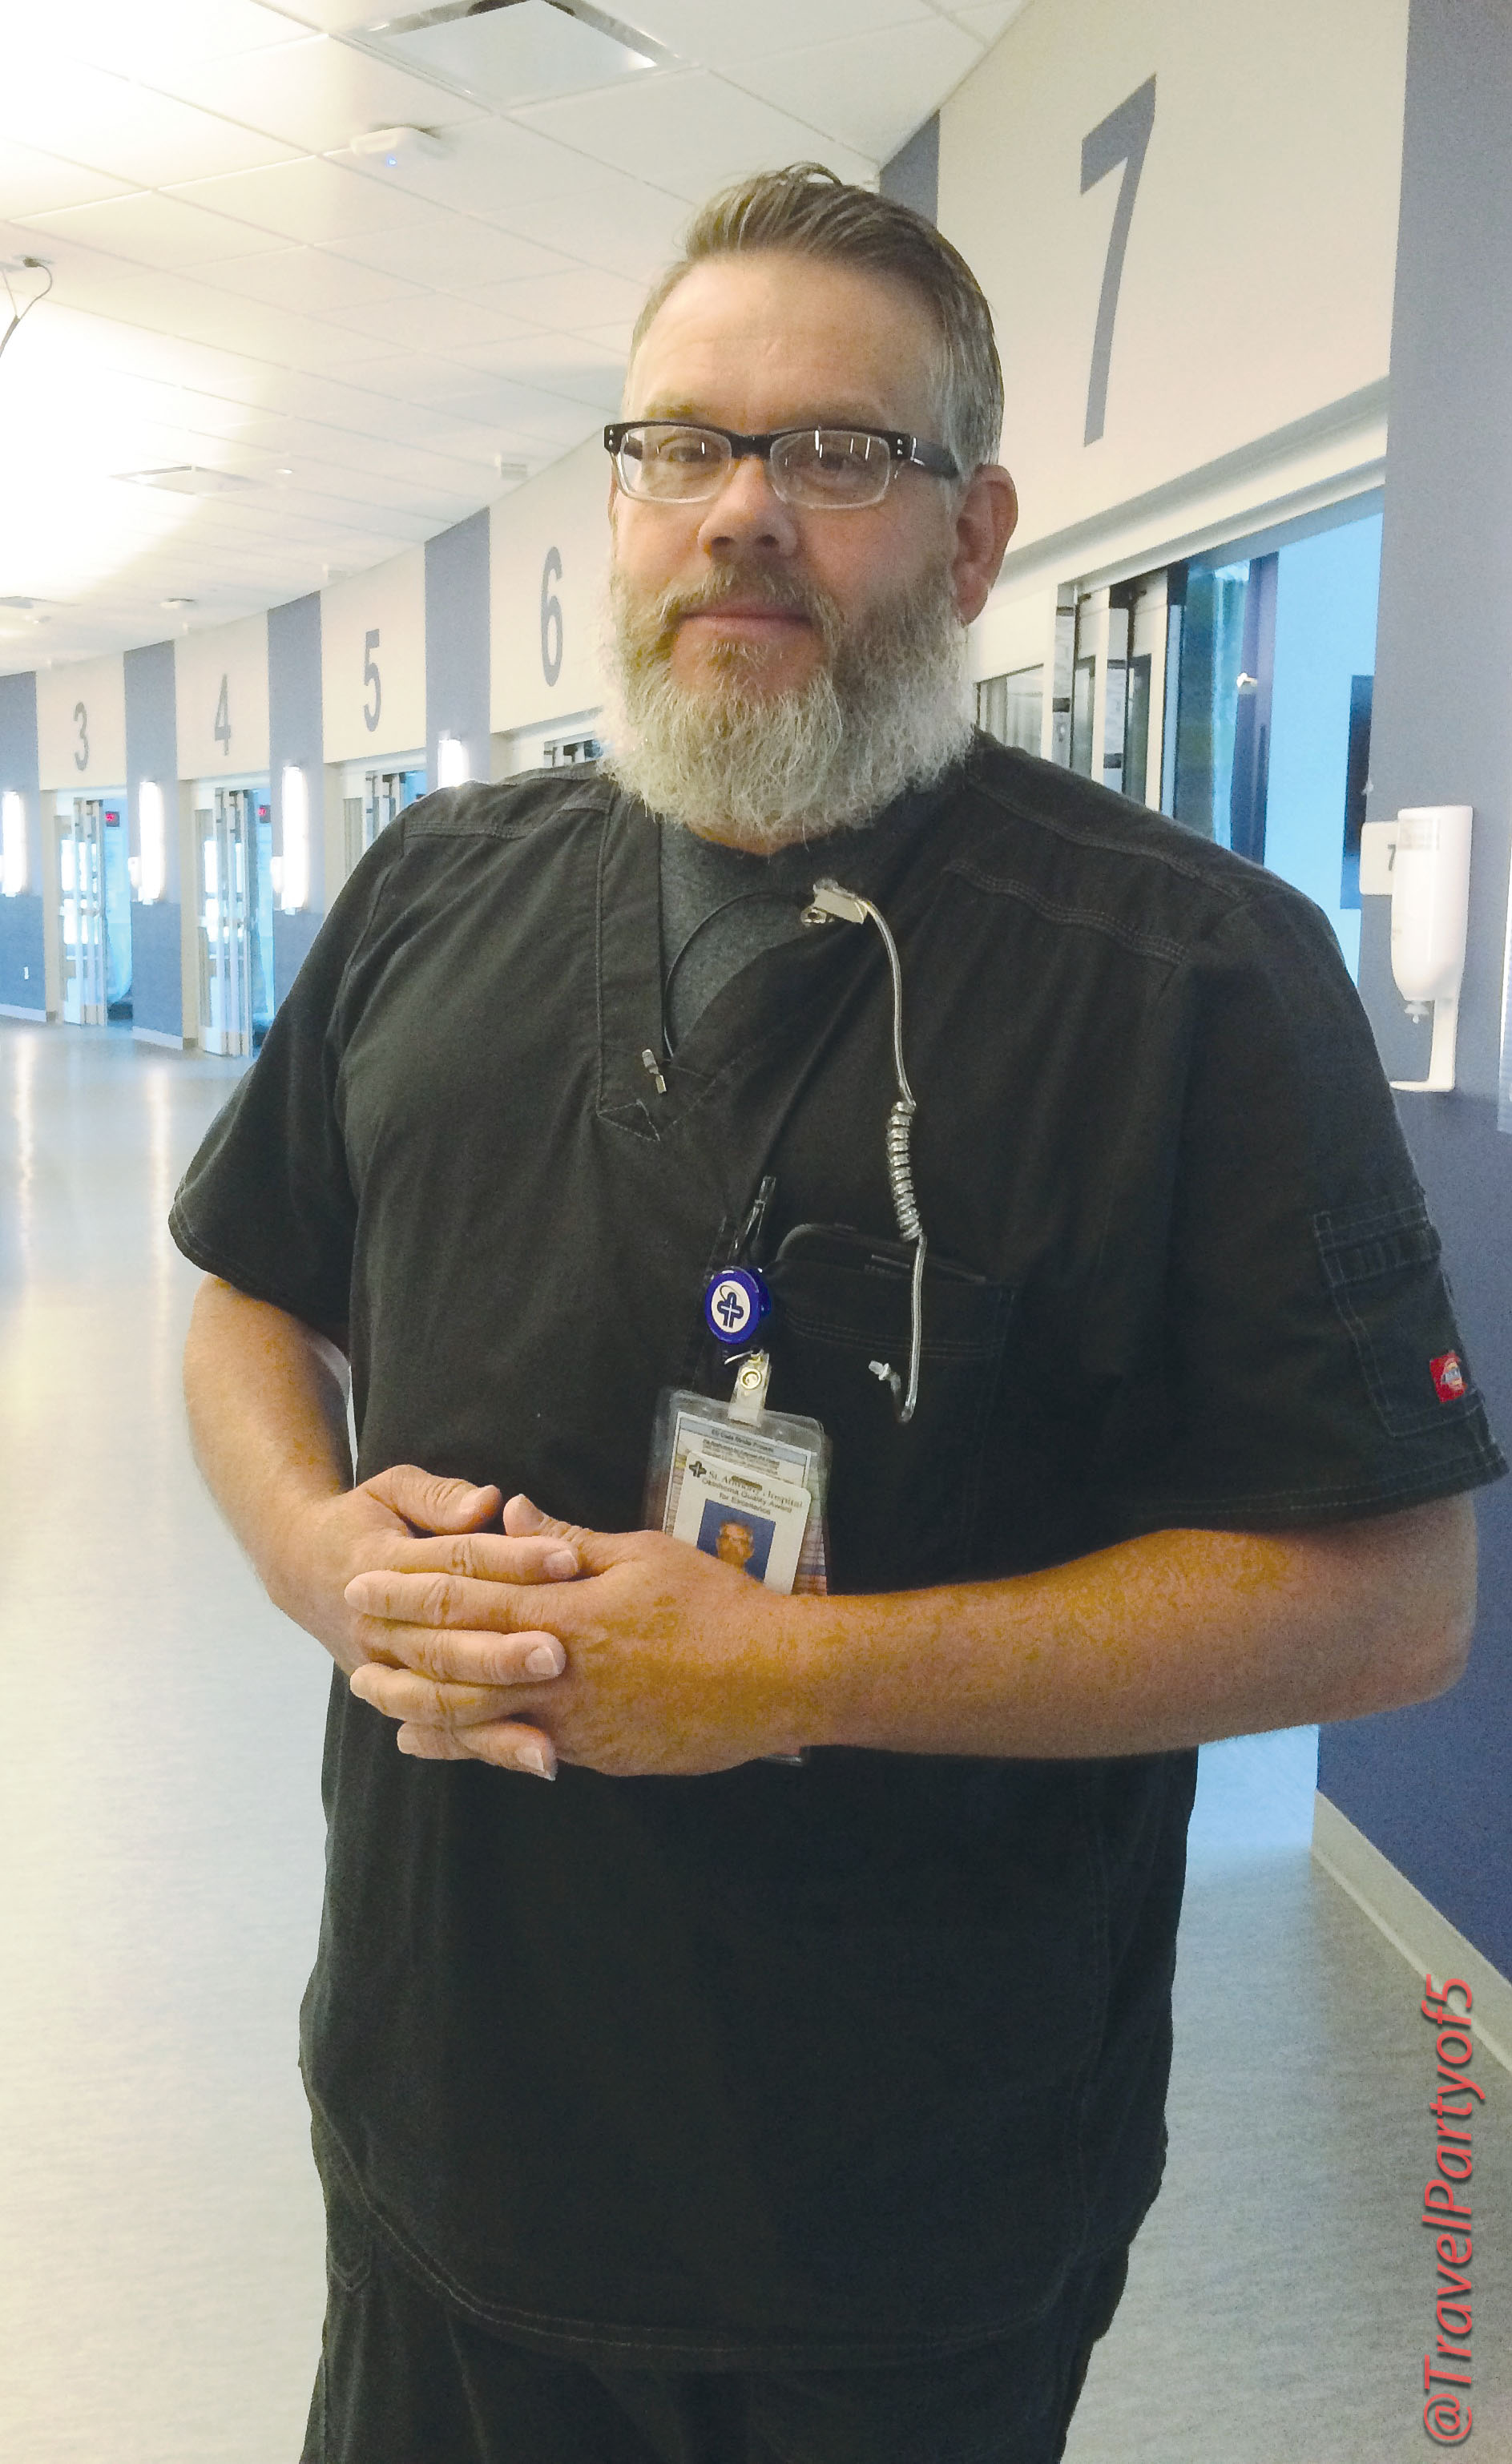 Debo Bond, RN, works at the new St. Anthony Healthplex in Mustang just a few minutes from where he grew up.